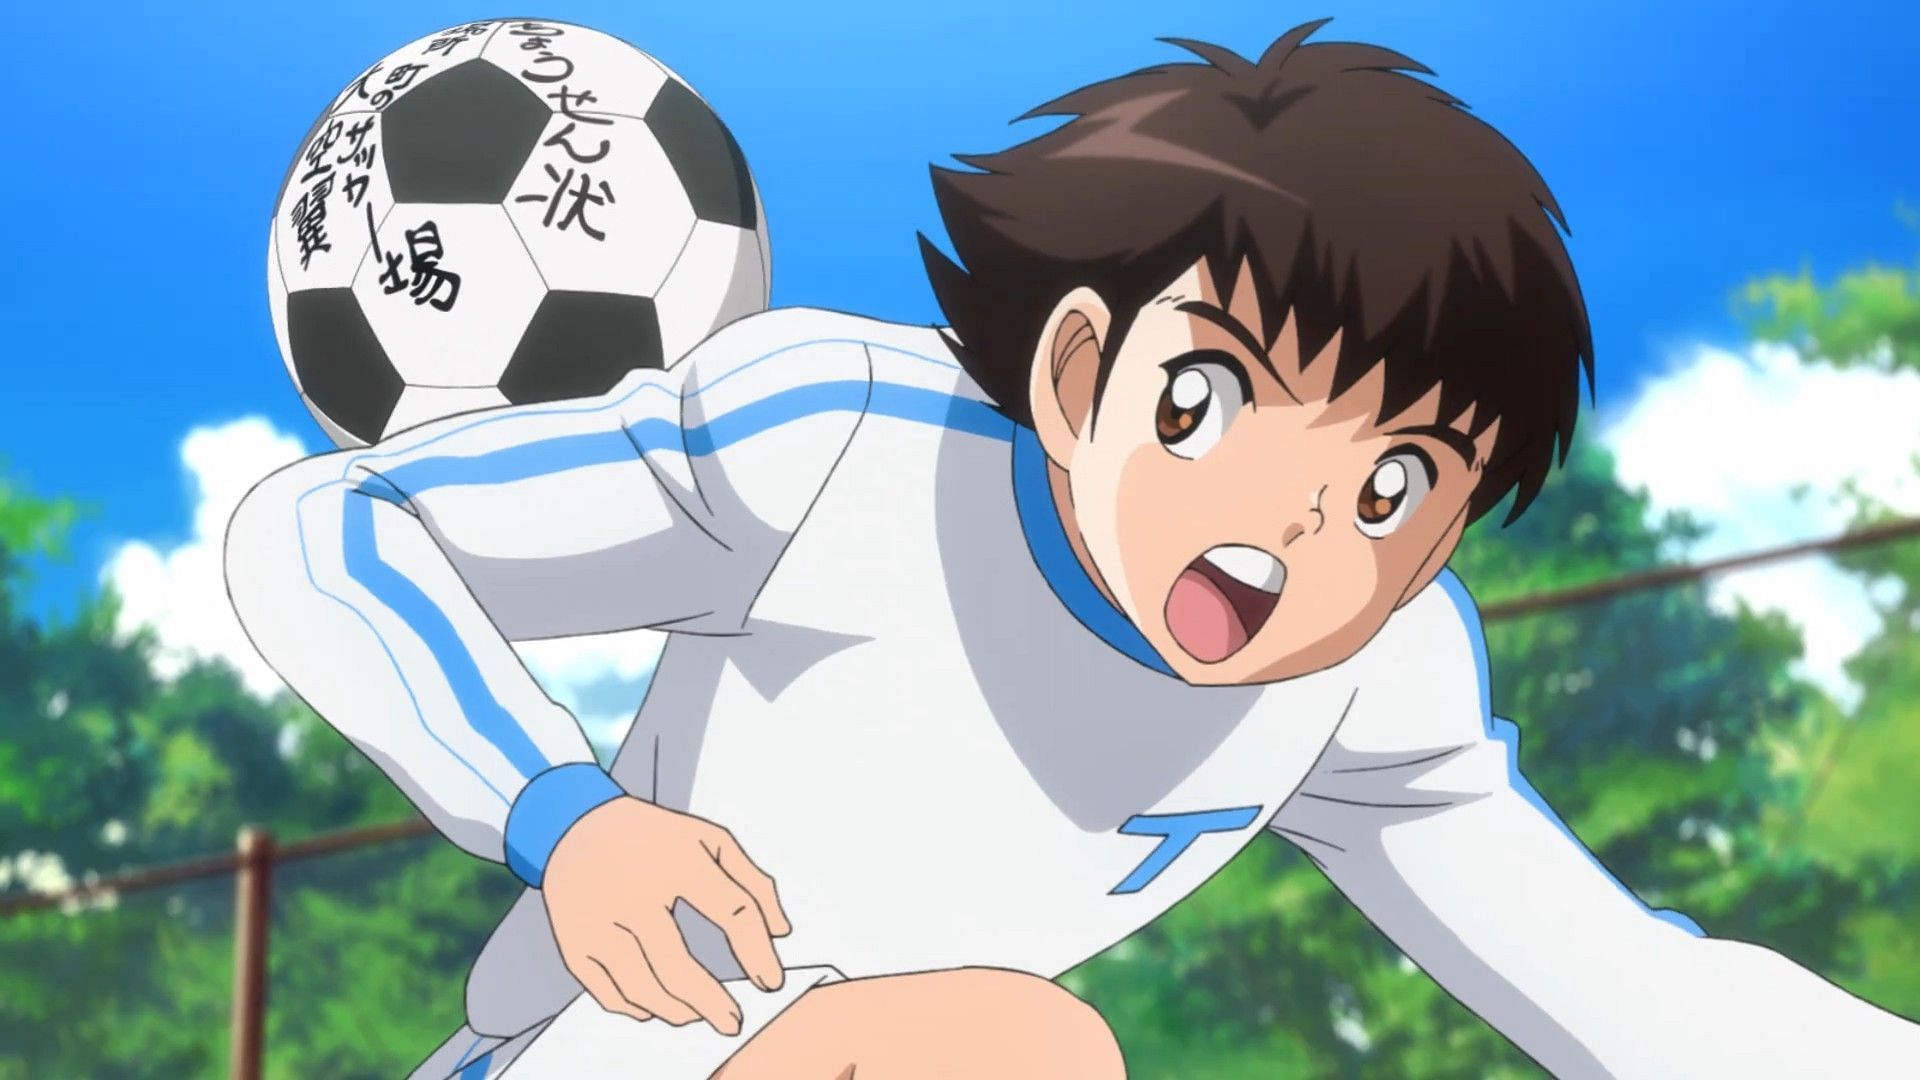 Blue Lock Episode 1 Review: Soccer Meets Squid Game